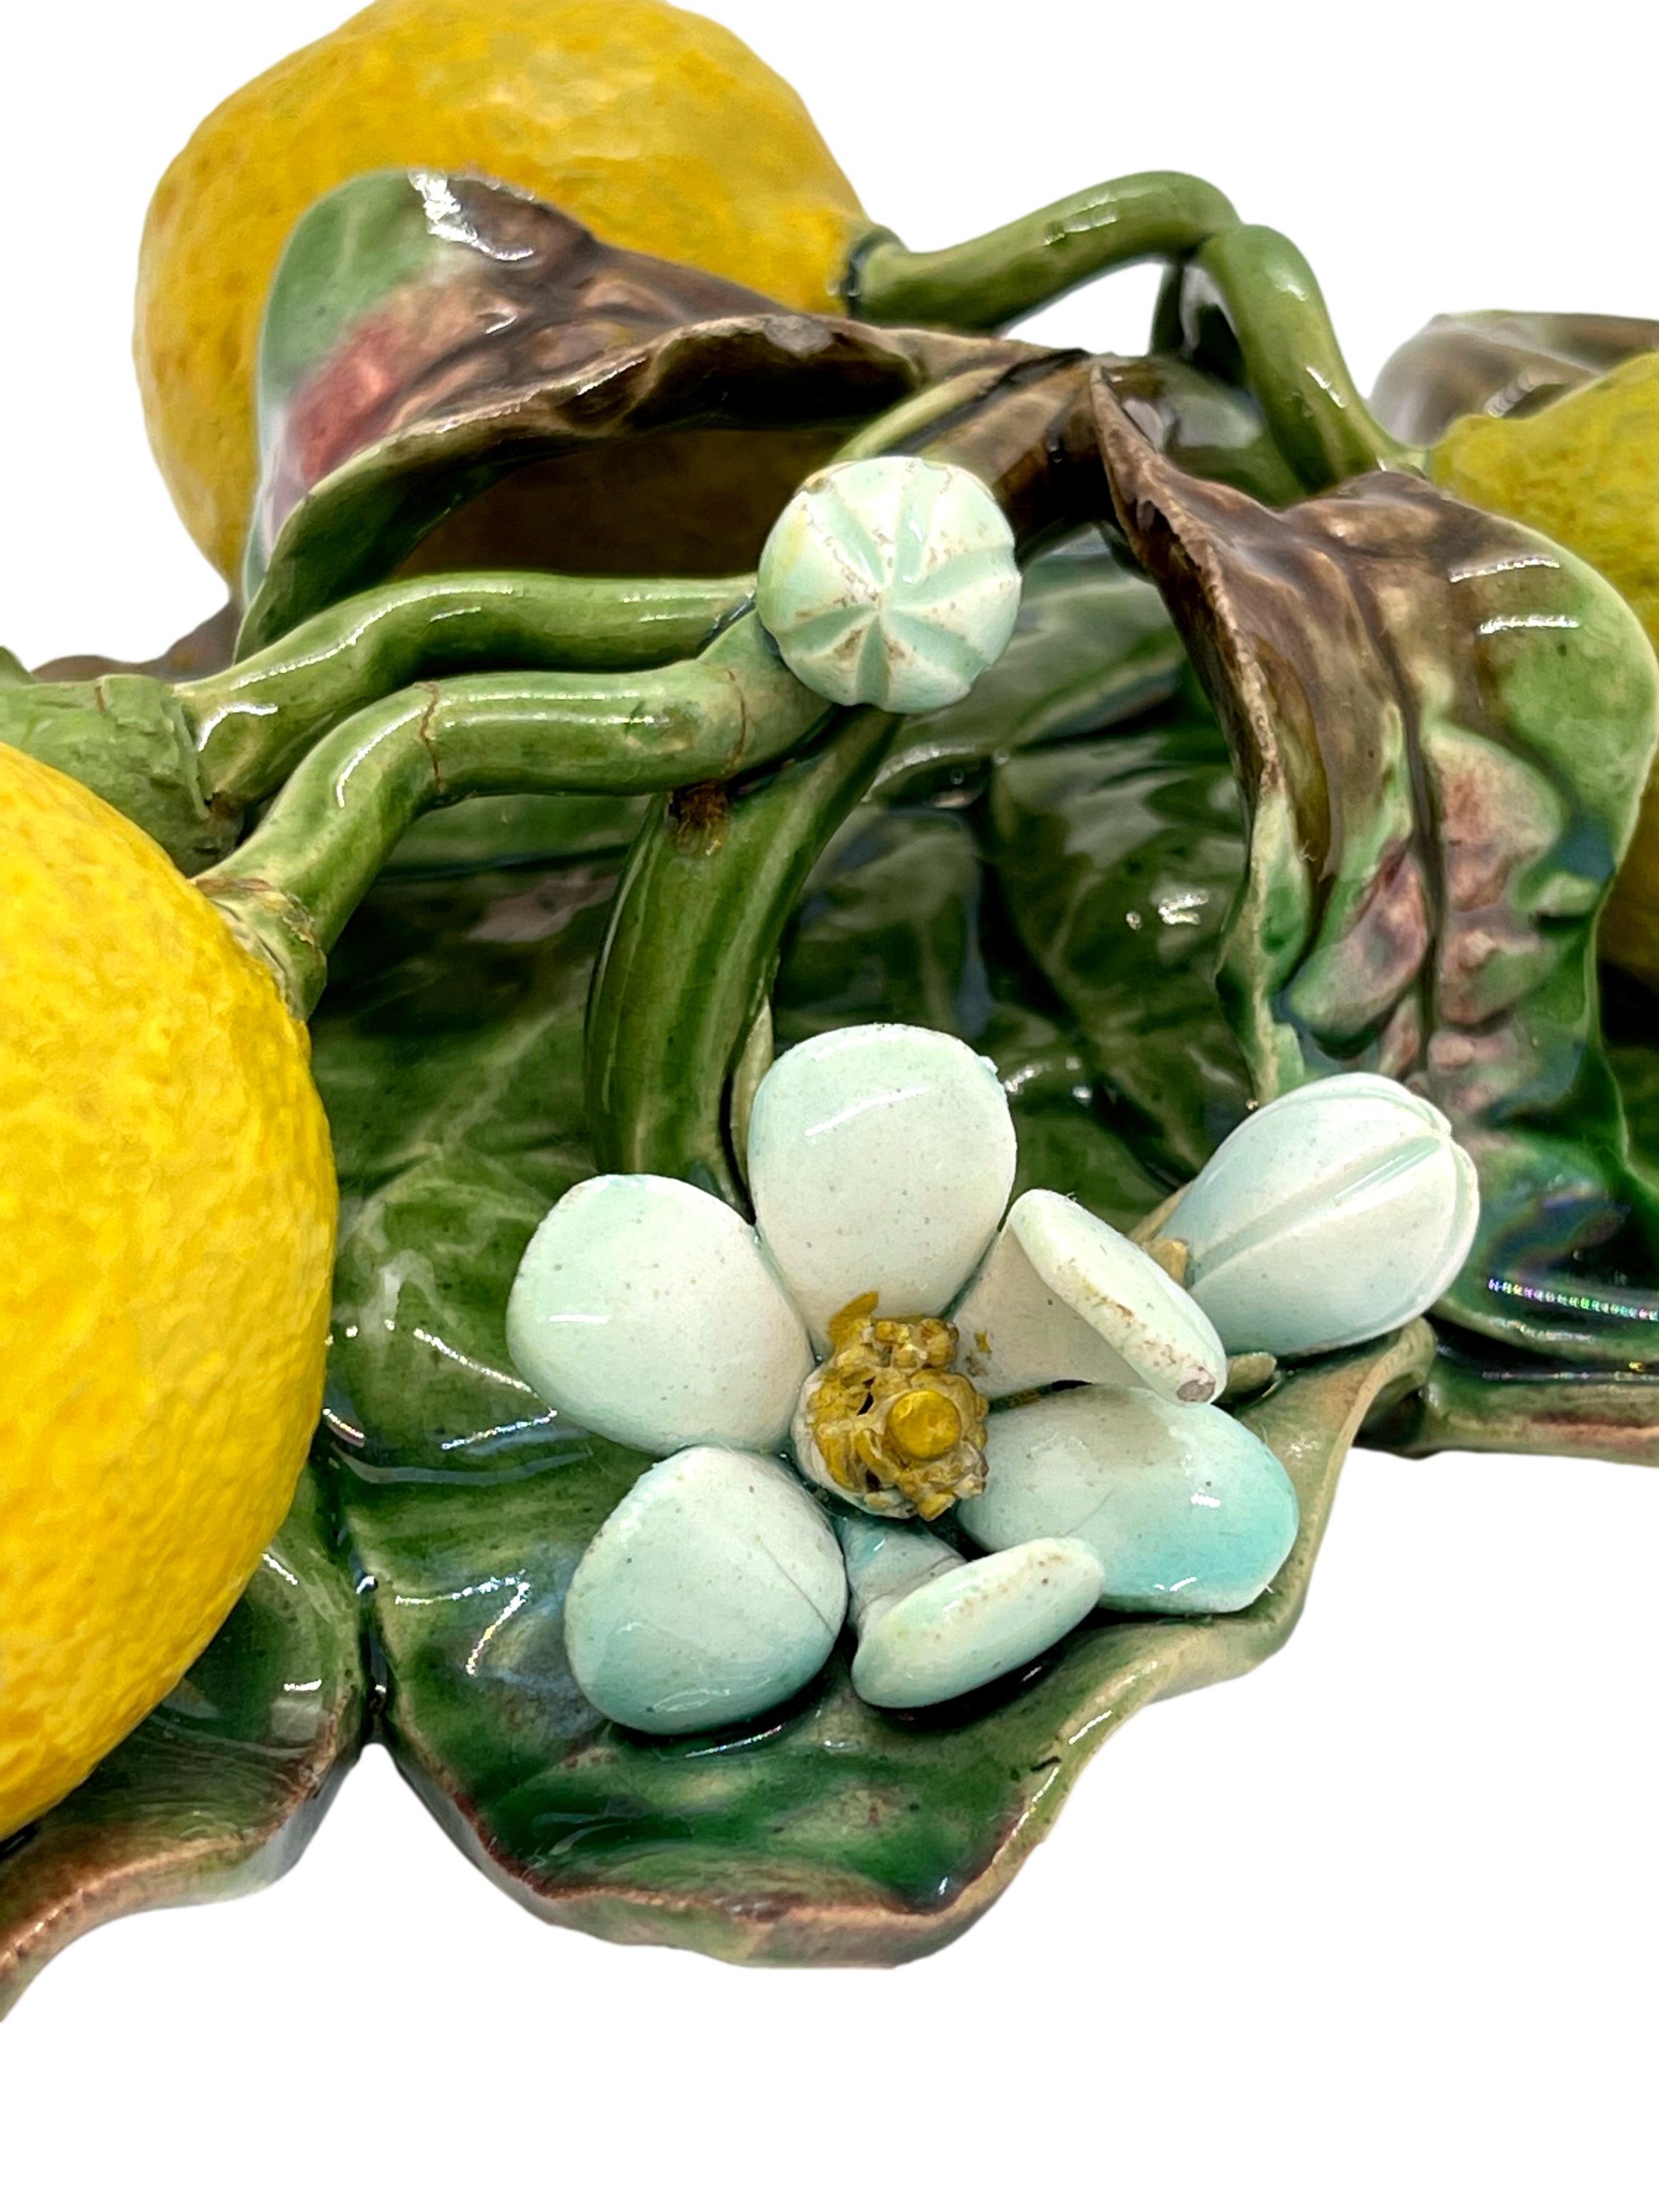 Menton French Majolica (Barbotine) Trompe L'oeil wall plaque, with lemons molded in high relief, circa 1880.
 
Generally referred to as 